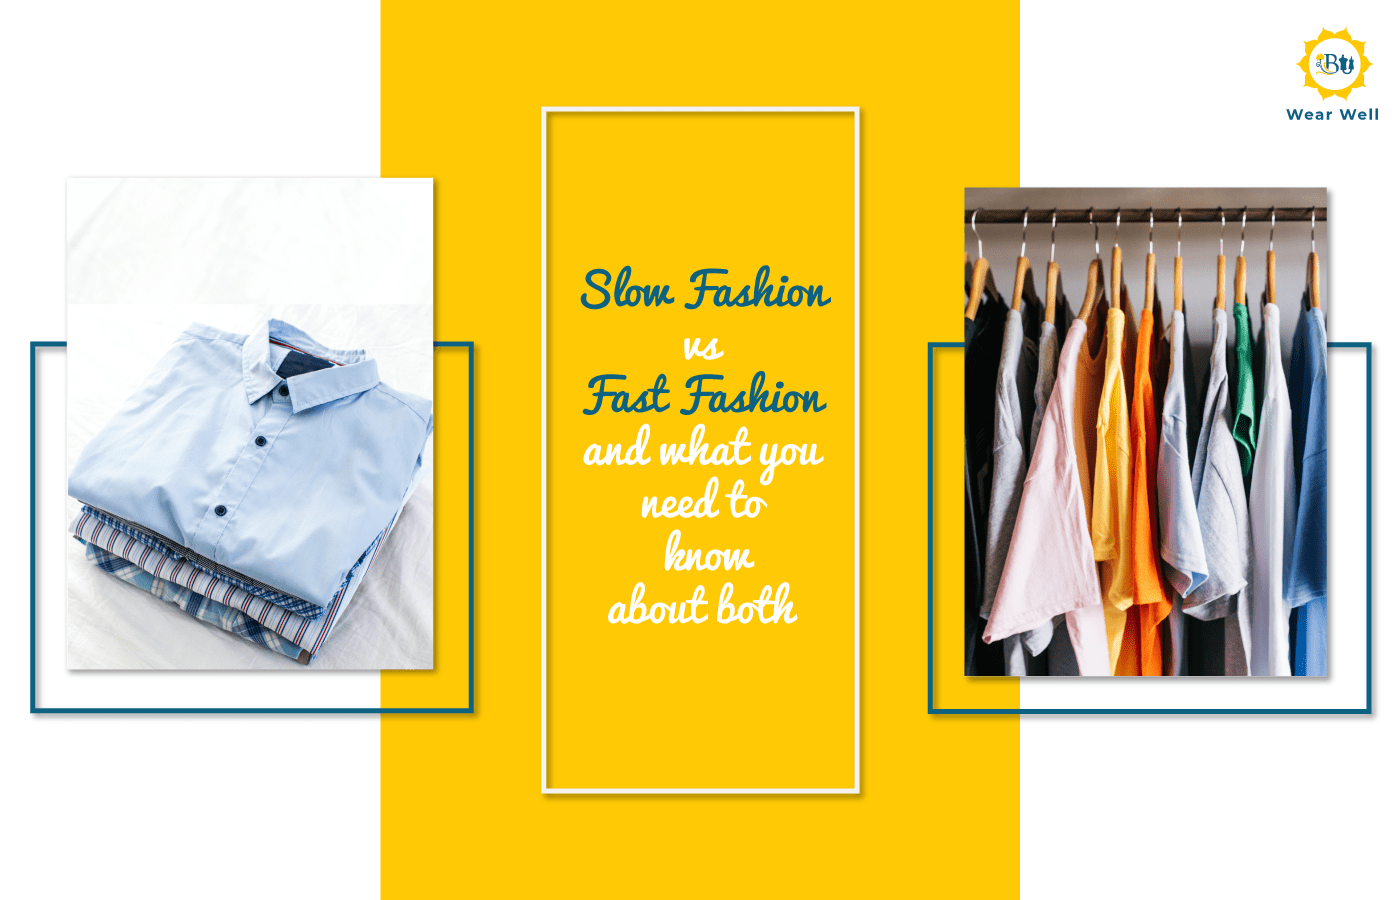 Slow Fashion vs Fast Fashion and what you need to know about both